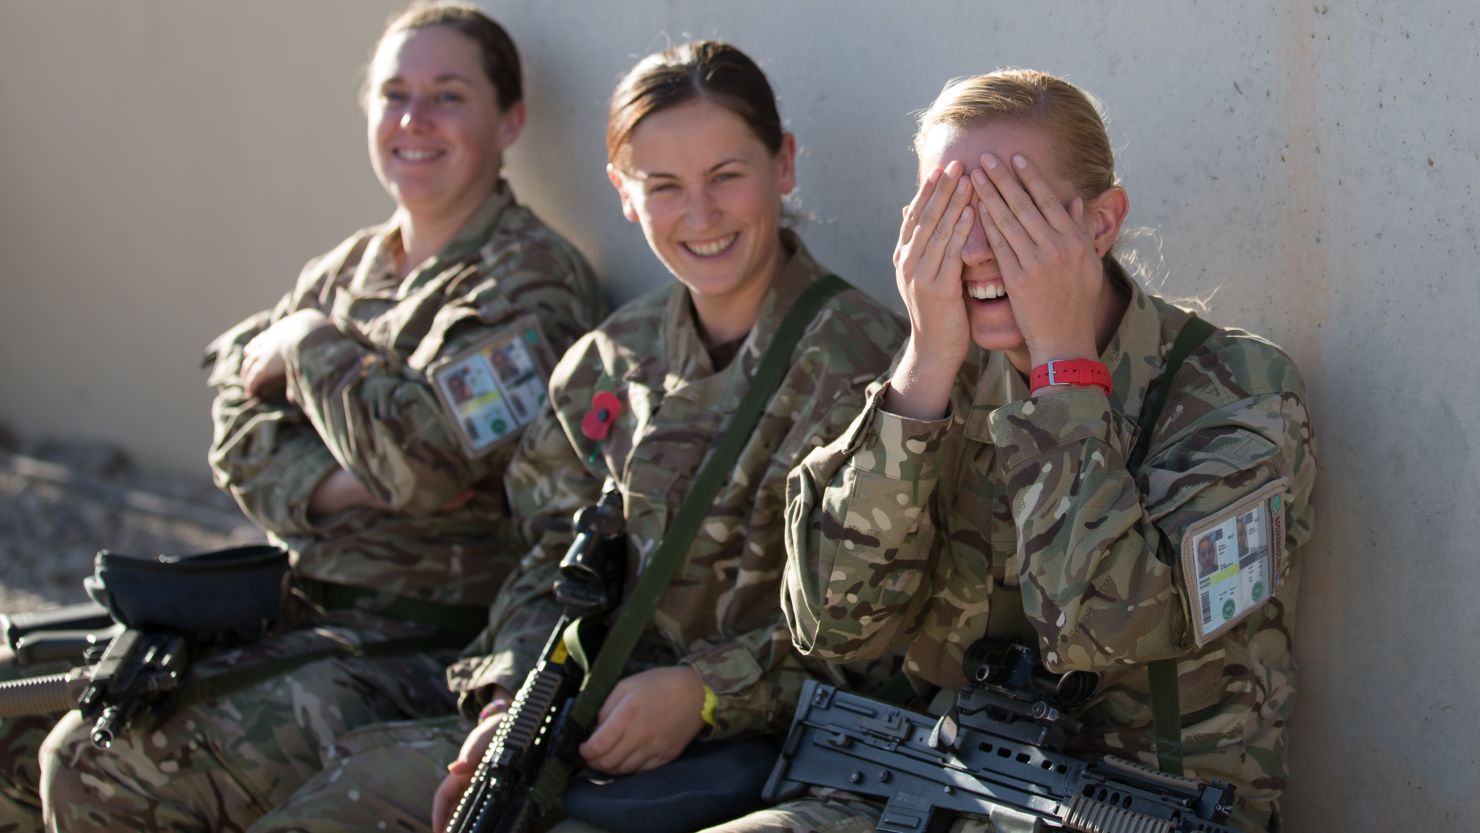 British female troops have served in Afghanistan and Iraq, but were barred from close combat roles.